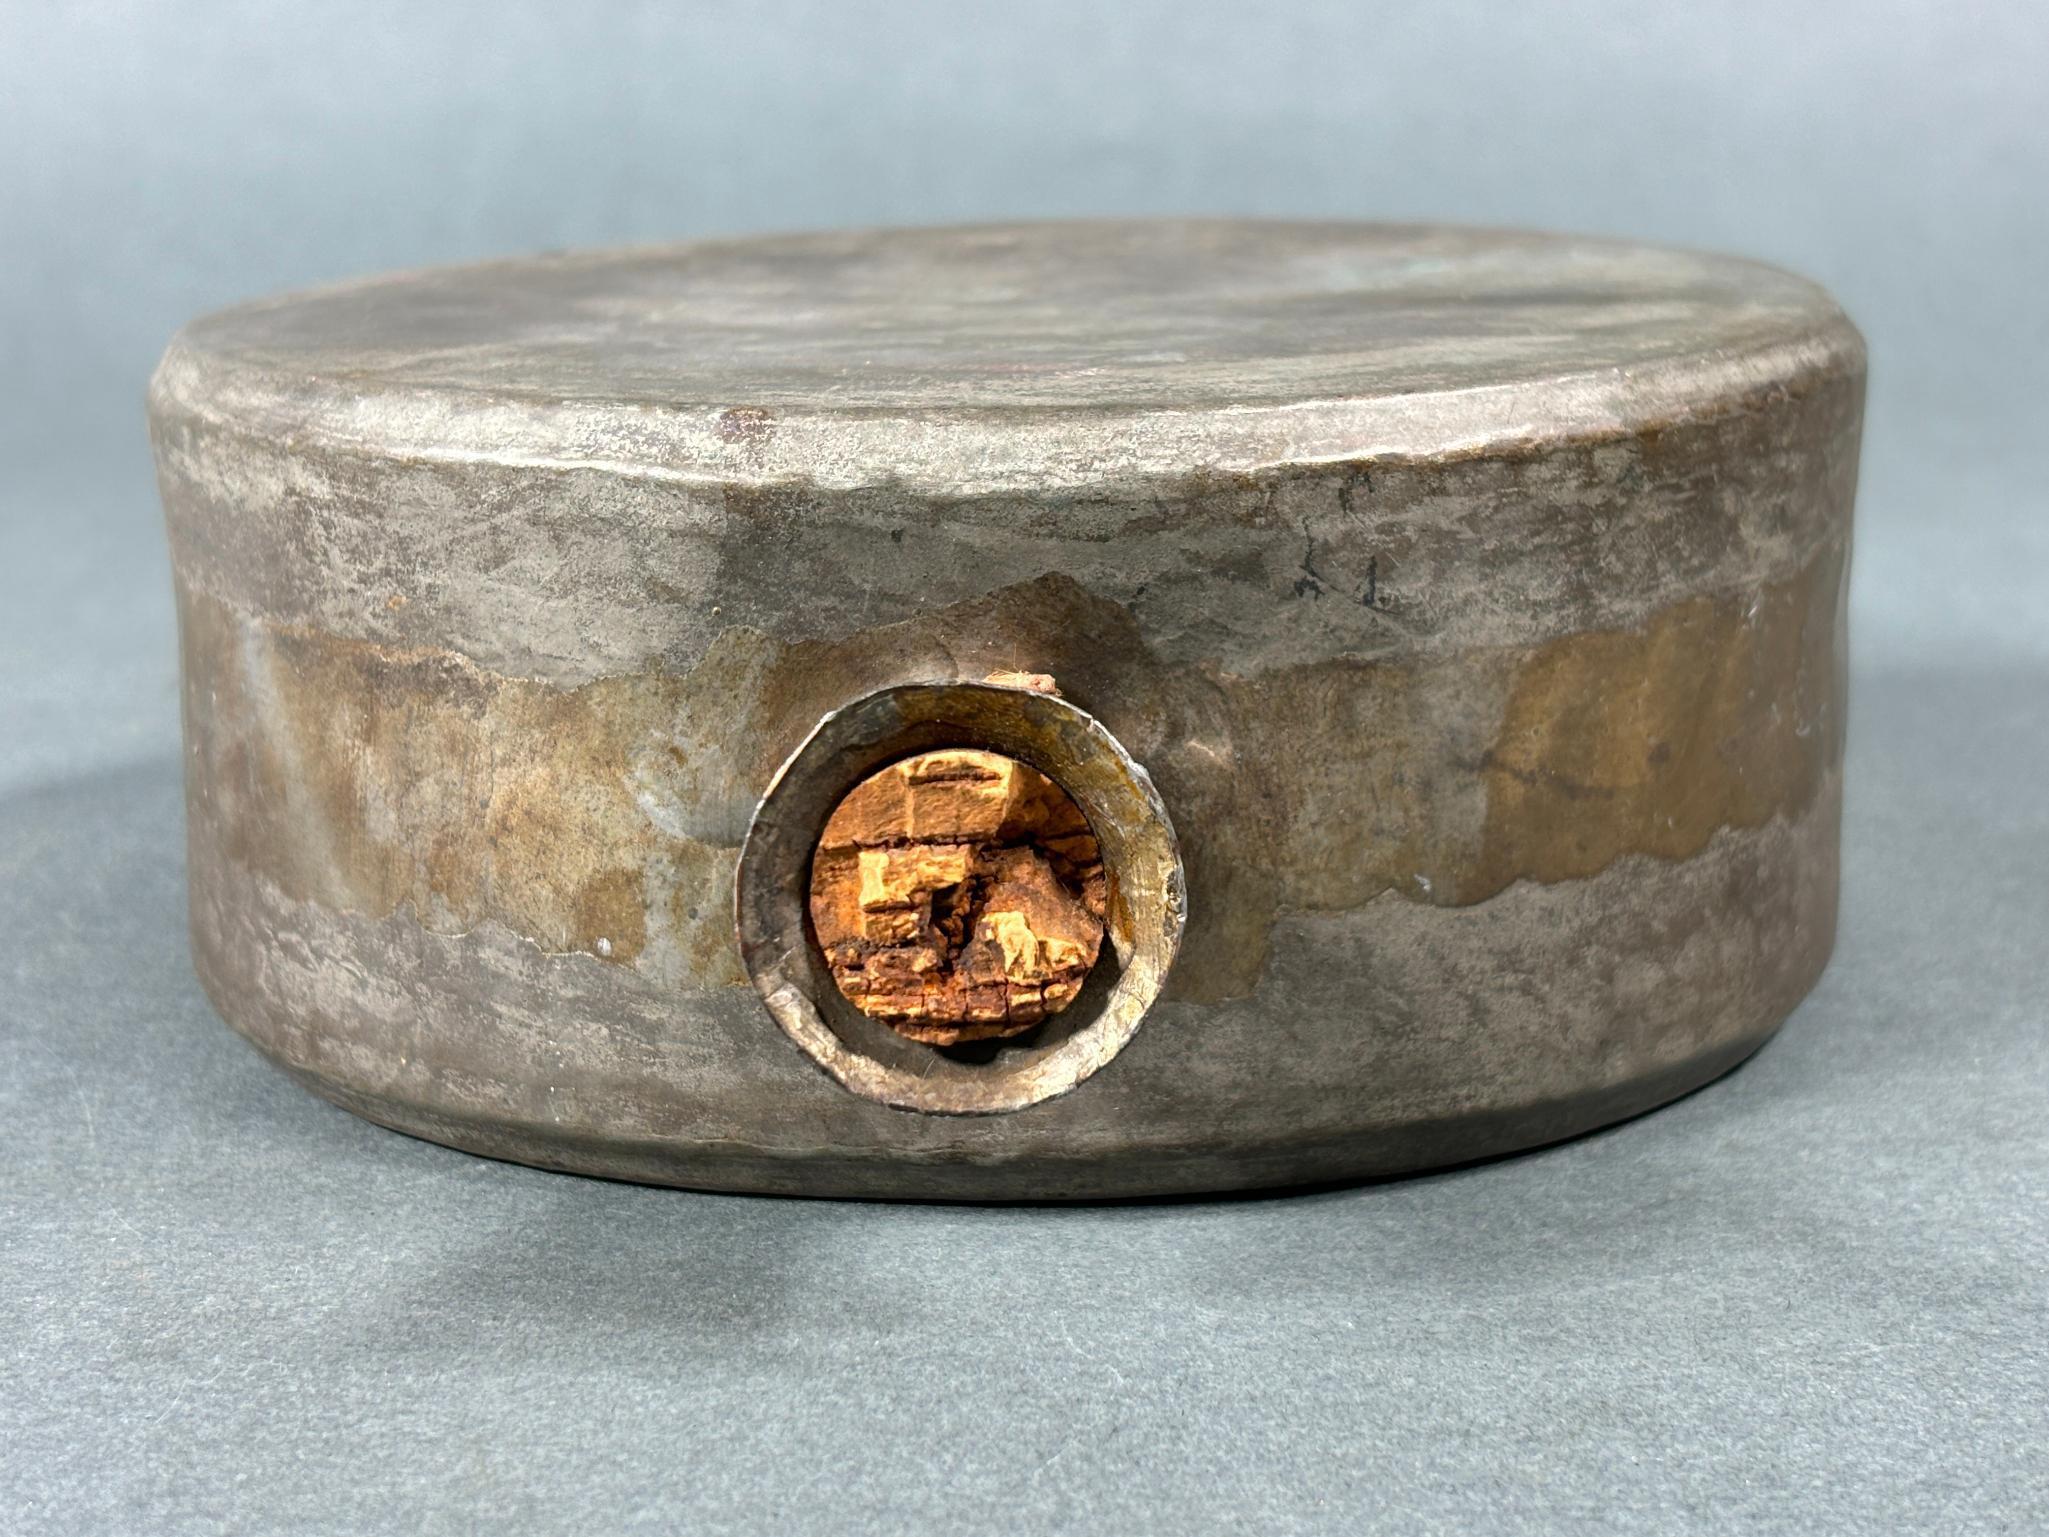 19TH CENTURY RUSSIAN TIN DRUM CANTEEN